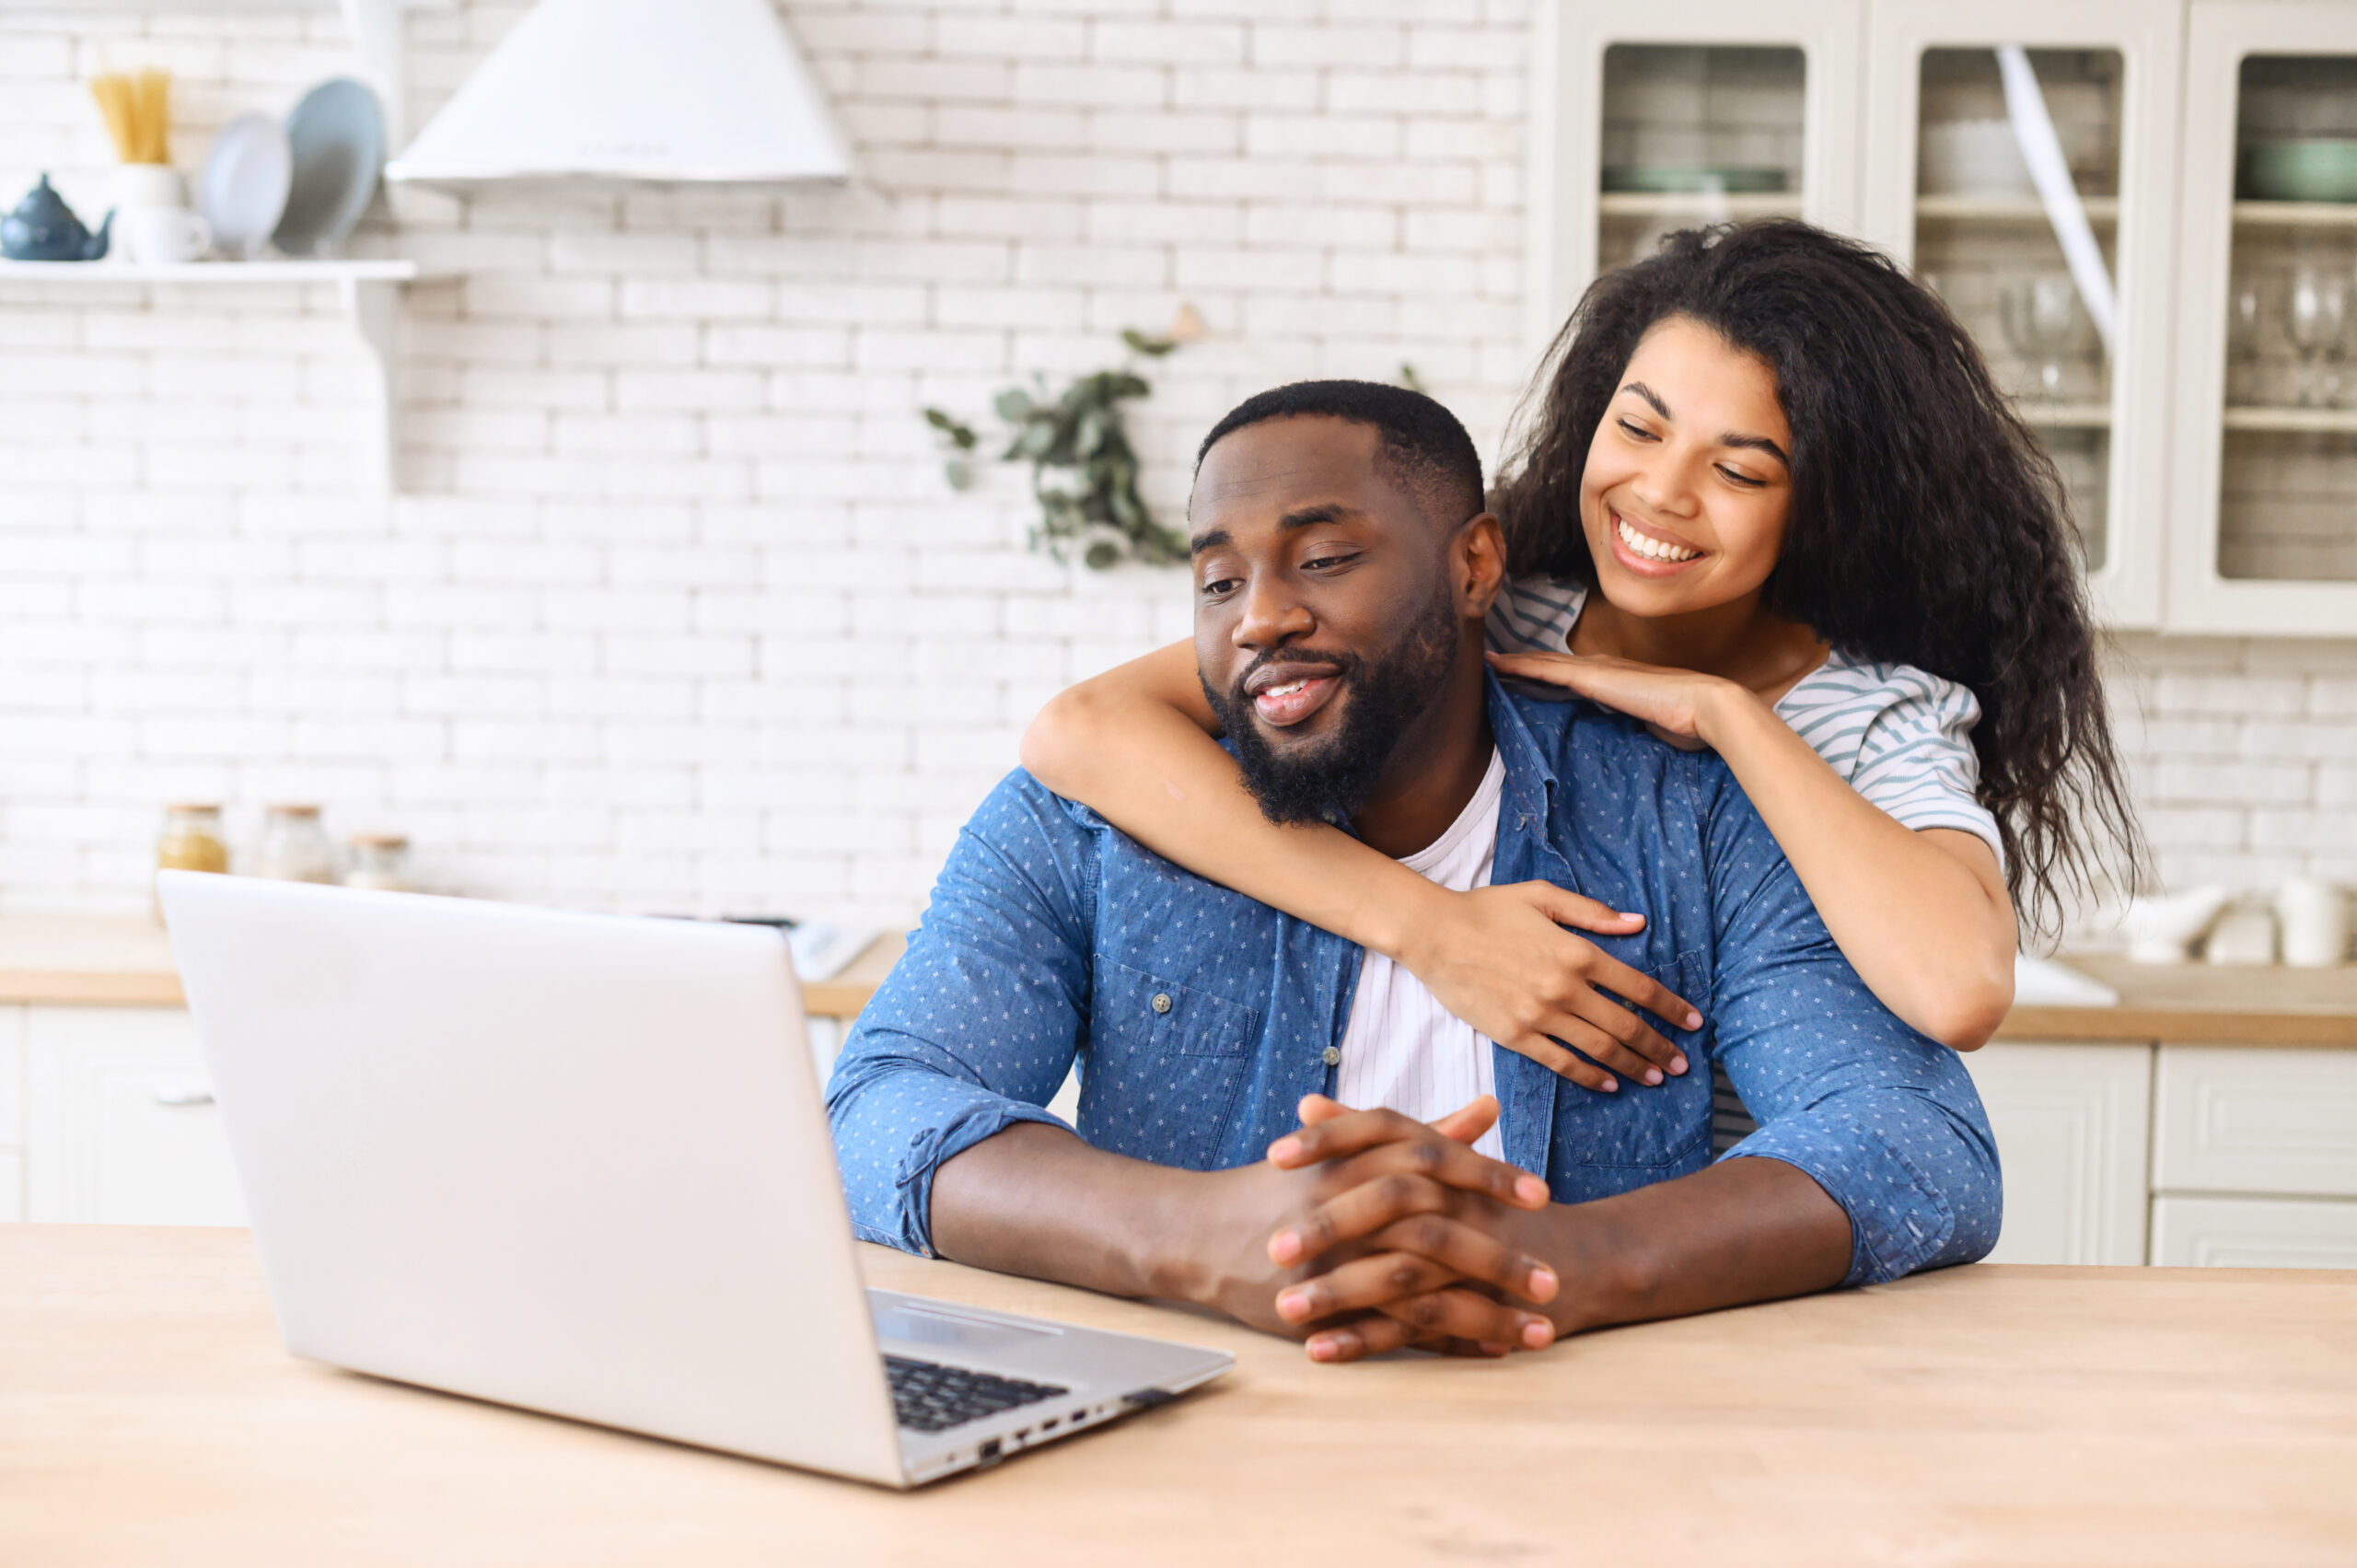 Woman hugging man from behind. The couple is relaxing in their kitchen, browsing internet on laptop about mortgage rates and finances